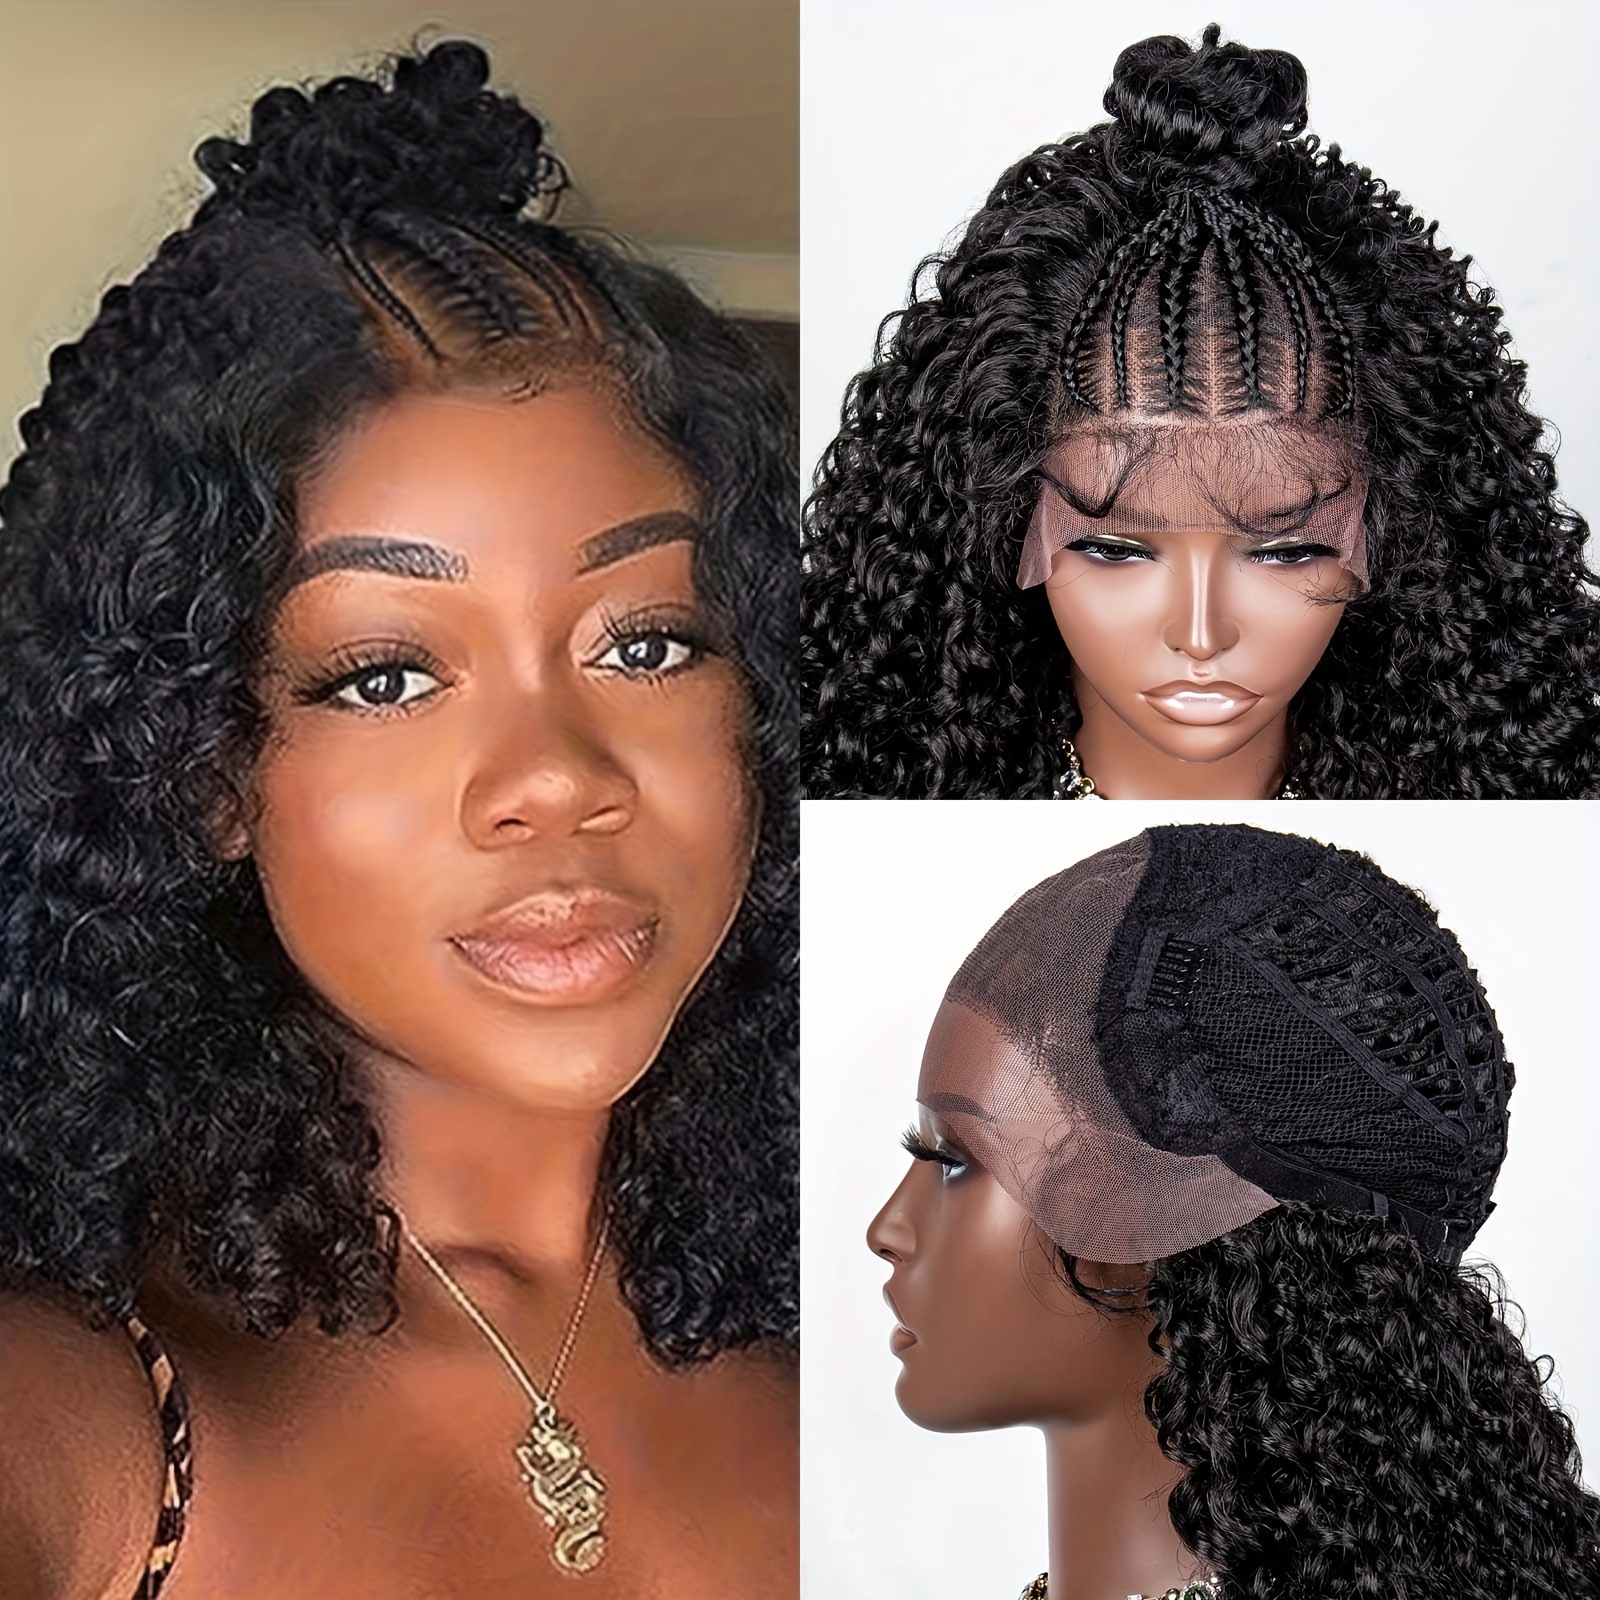 

13x4 Lace Half Braided Curly Wavy Wigs For Women Cornrow Braided Wigs Black Half Braids Half Weave Synthetic Lace Wig